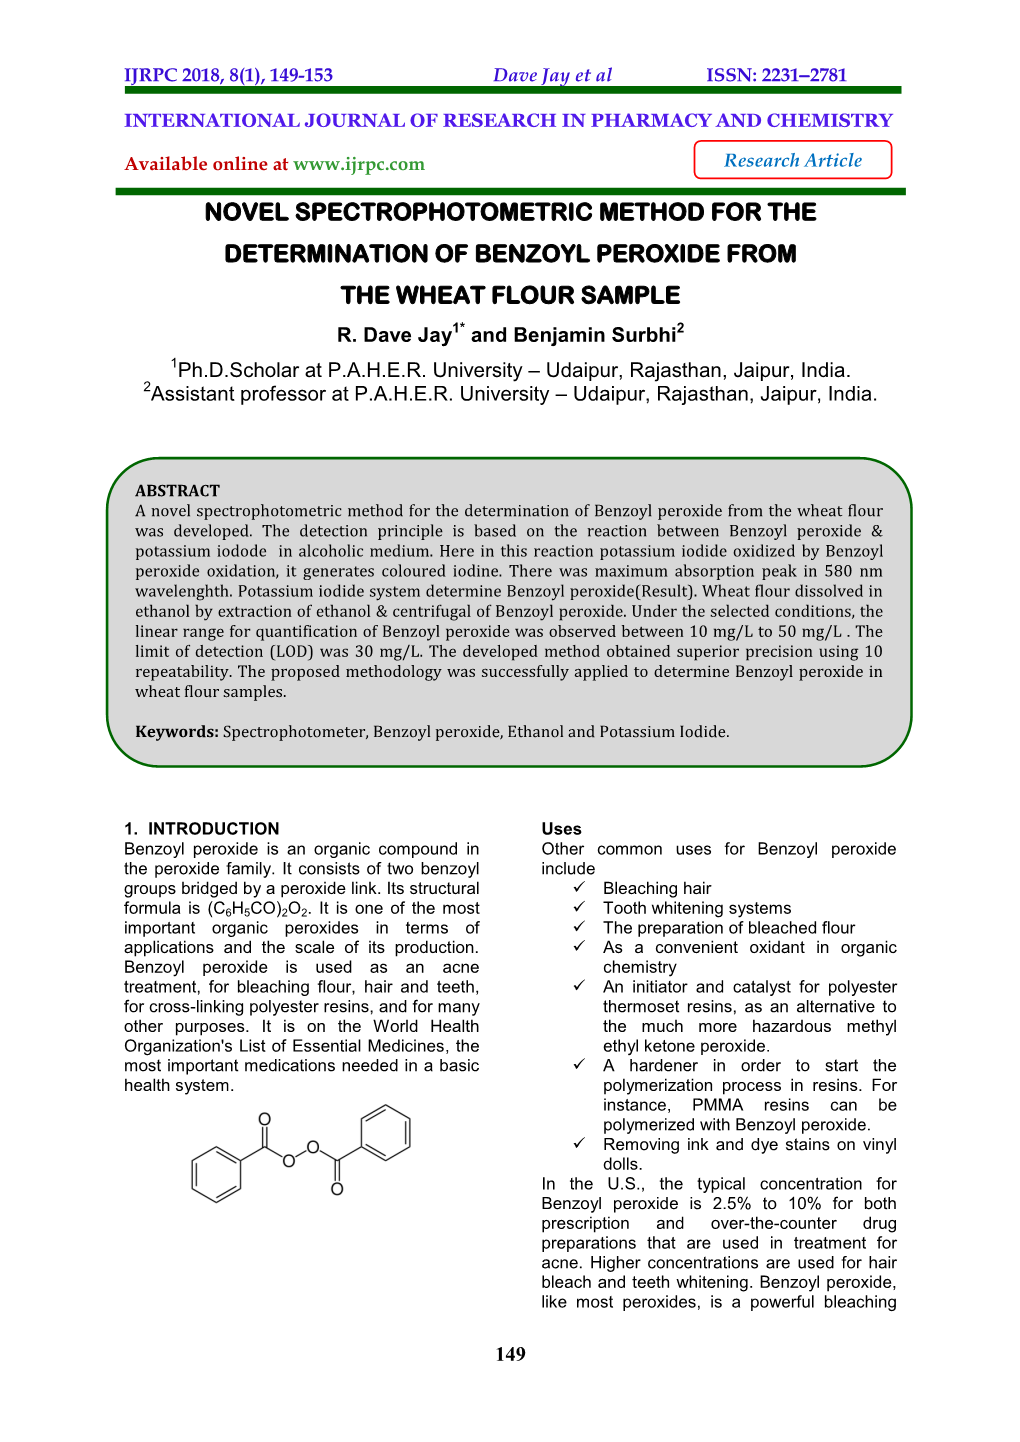 Novel Spectrophotometric Method for the Determination of Benzoyl Peroxide from the Wheat Flour Sample R